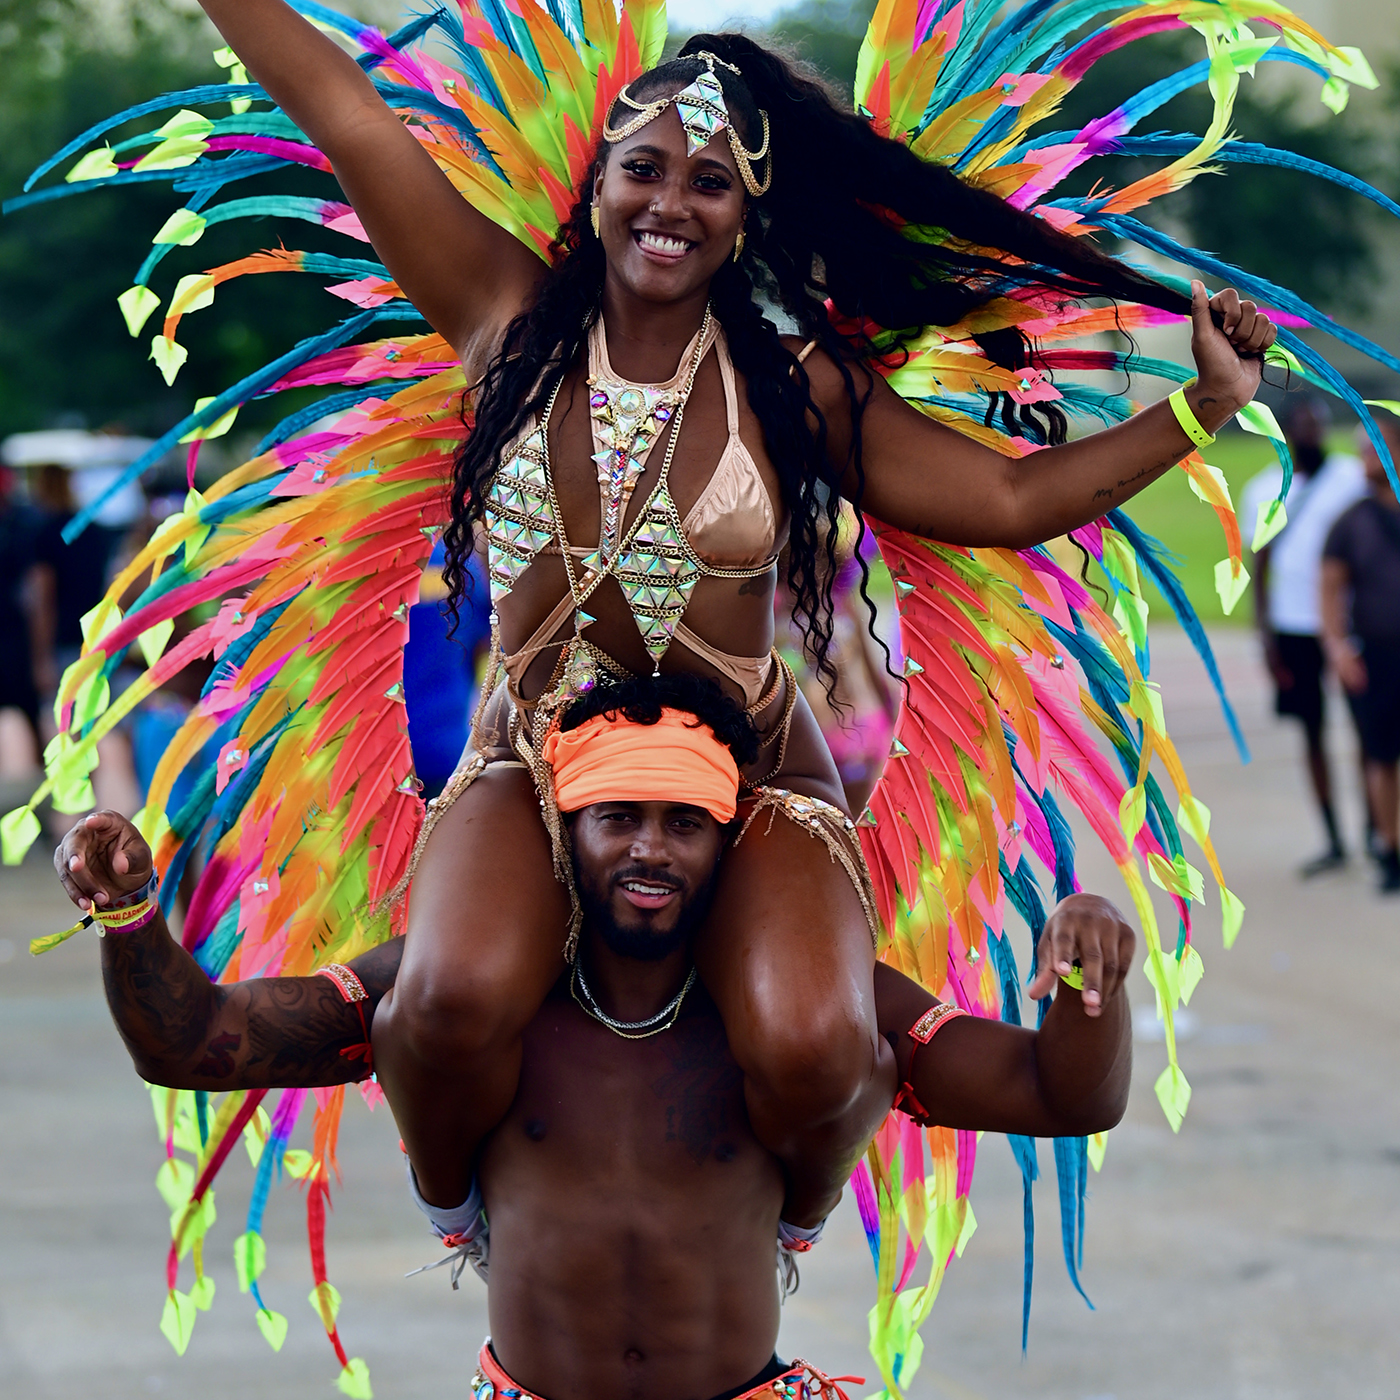 Miami Carnival attendees